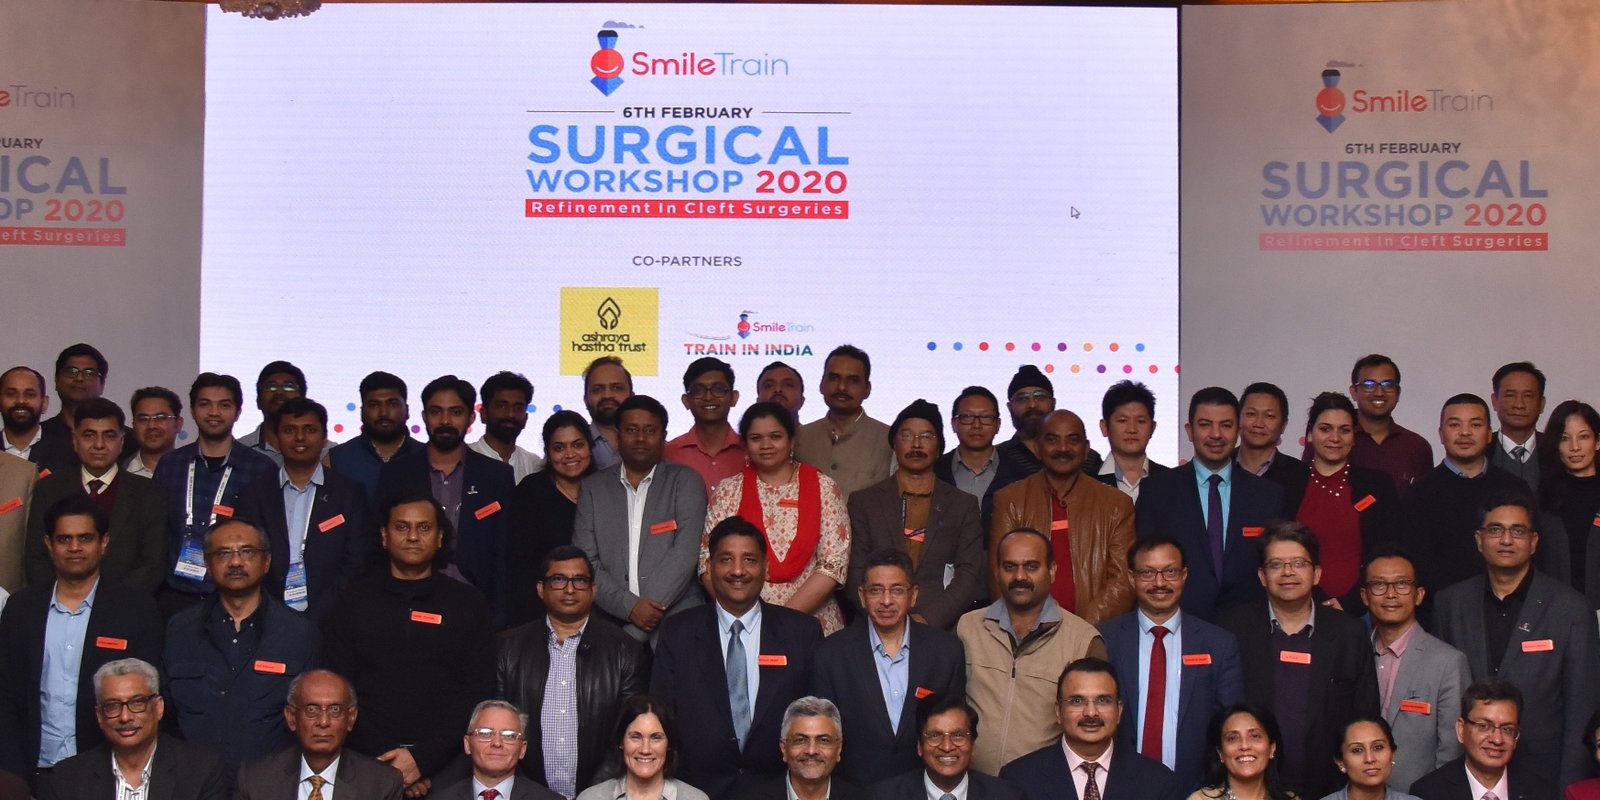 Global and Indian surgeons conduct a live surgical demonstration on cleft reparative surgery in association with Smile Train in Delhi